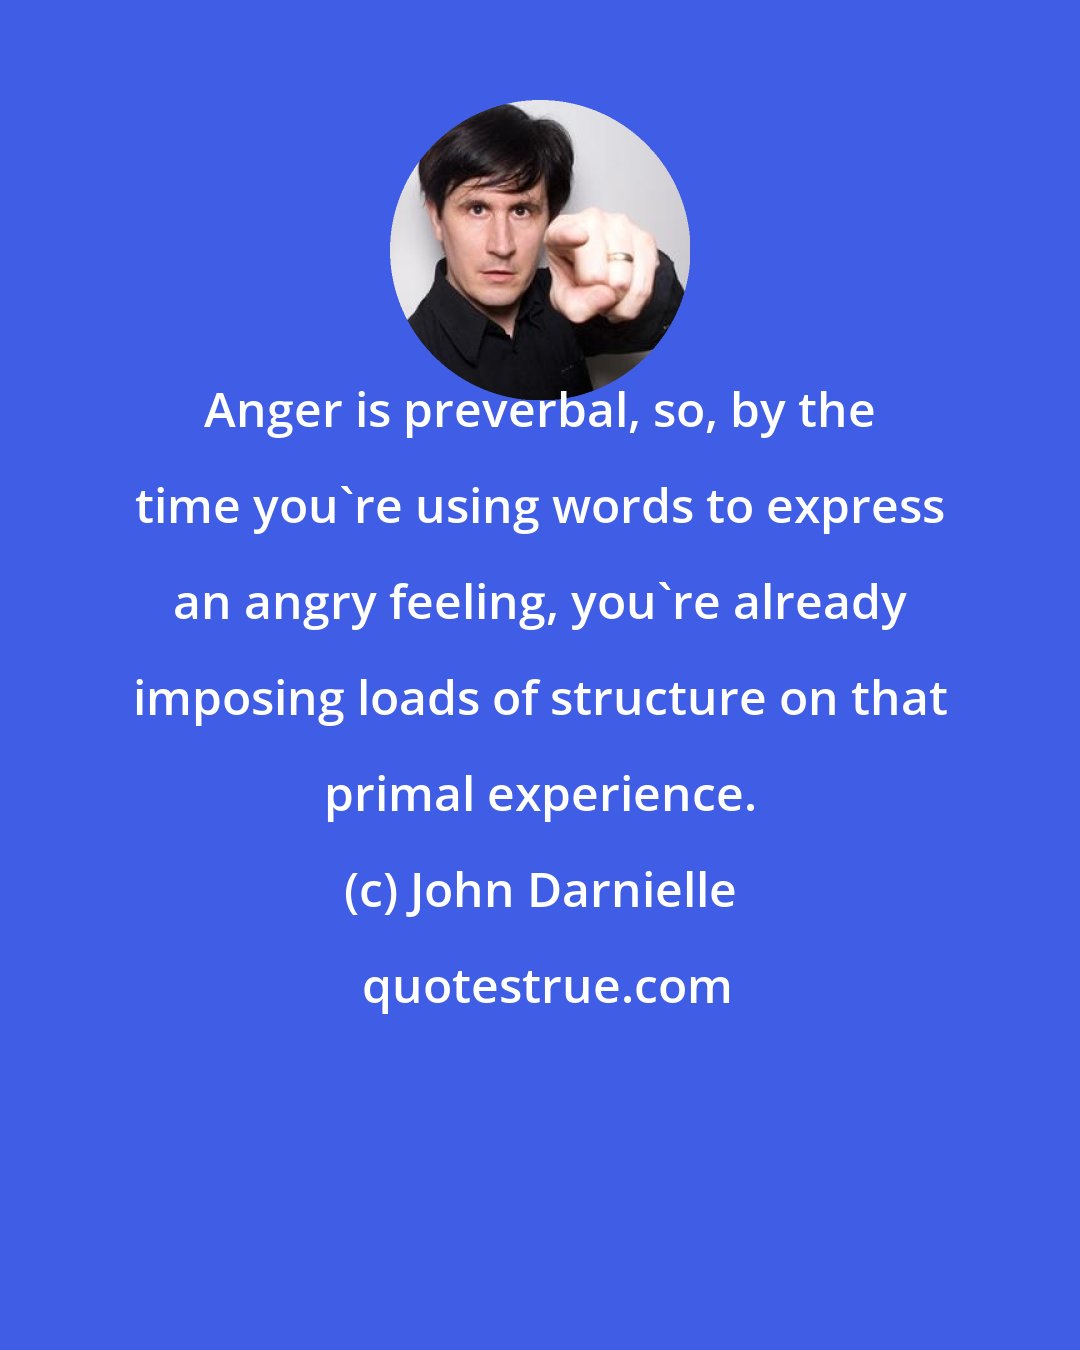 John Darnielle: Anger is preverbal, so, by the time you're using words to express an angry feeling, you're already imposing loads of structure on that primal experience.